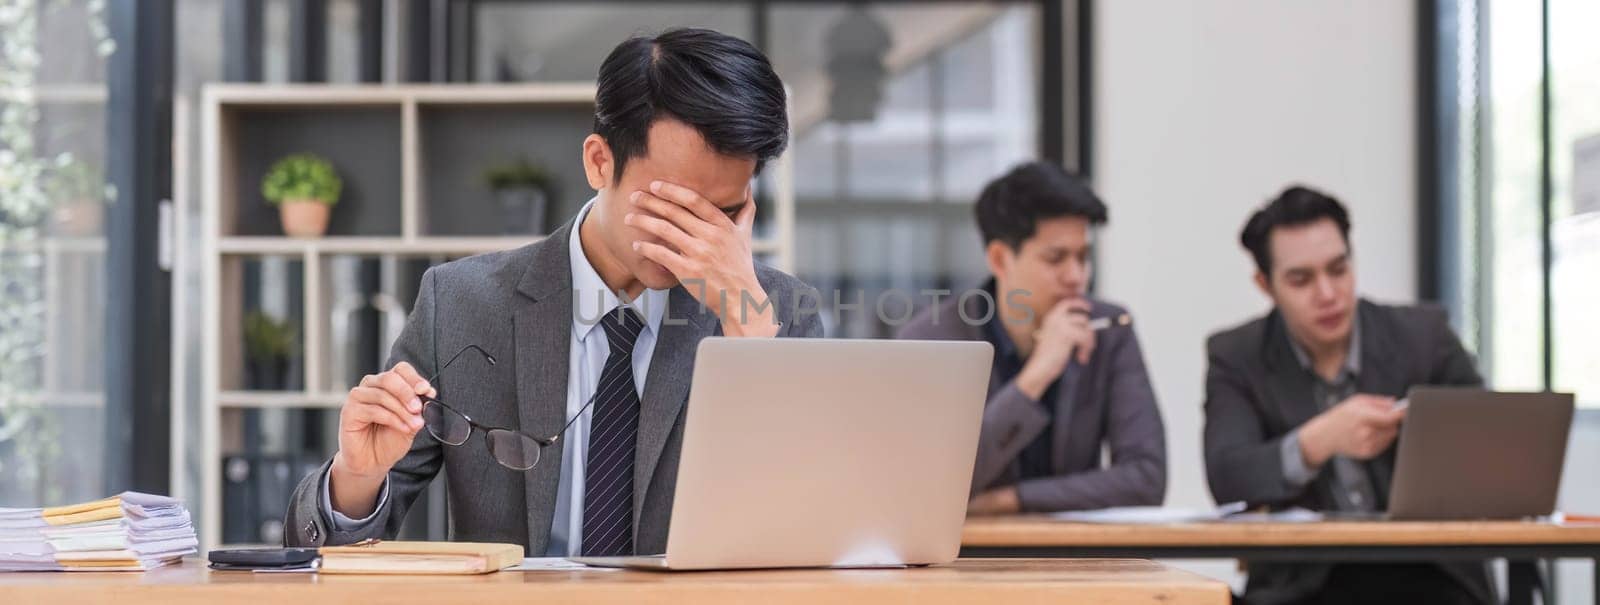 Focused serious professional using laptop in office lobby. Young asian man using laptop in background. Wireless technology concept..